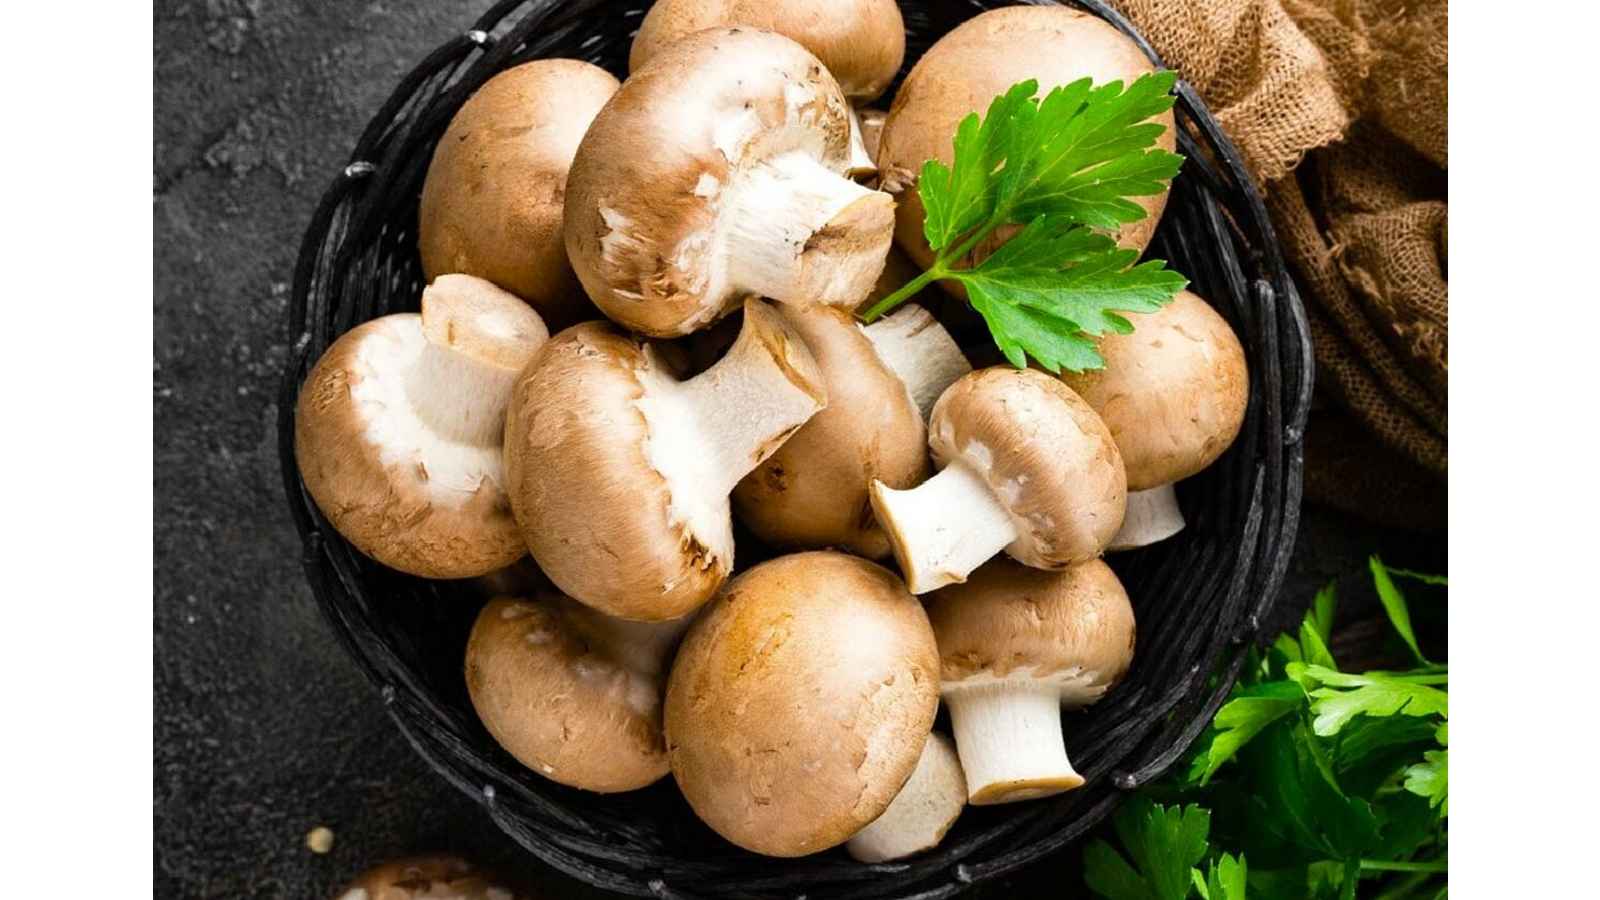 National Mushroom Day 2023: Date, History, Facts, Activities